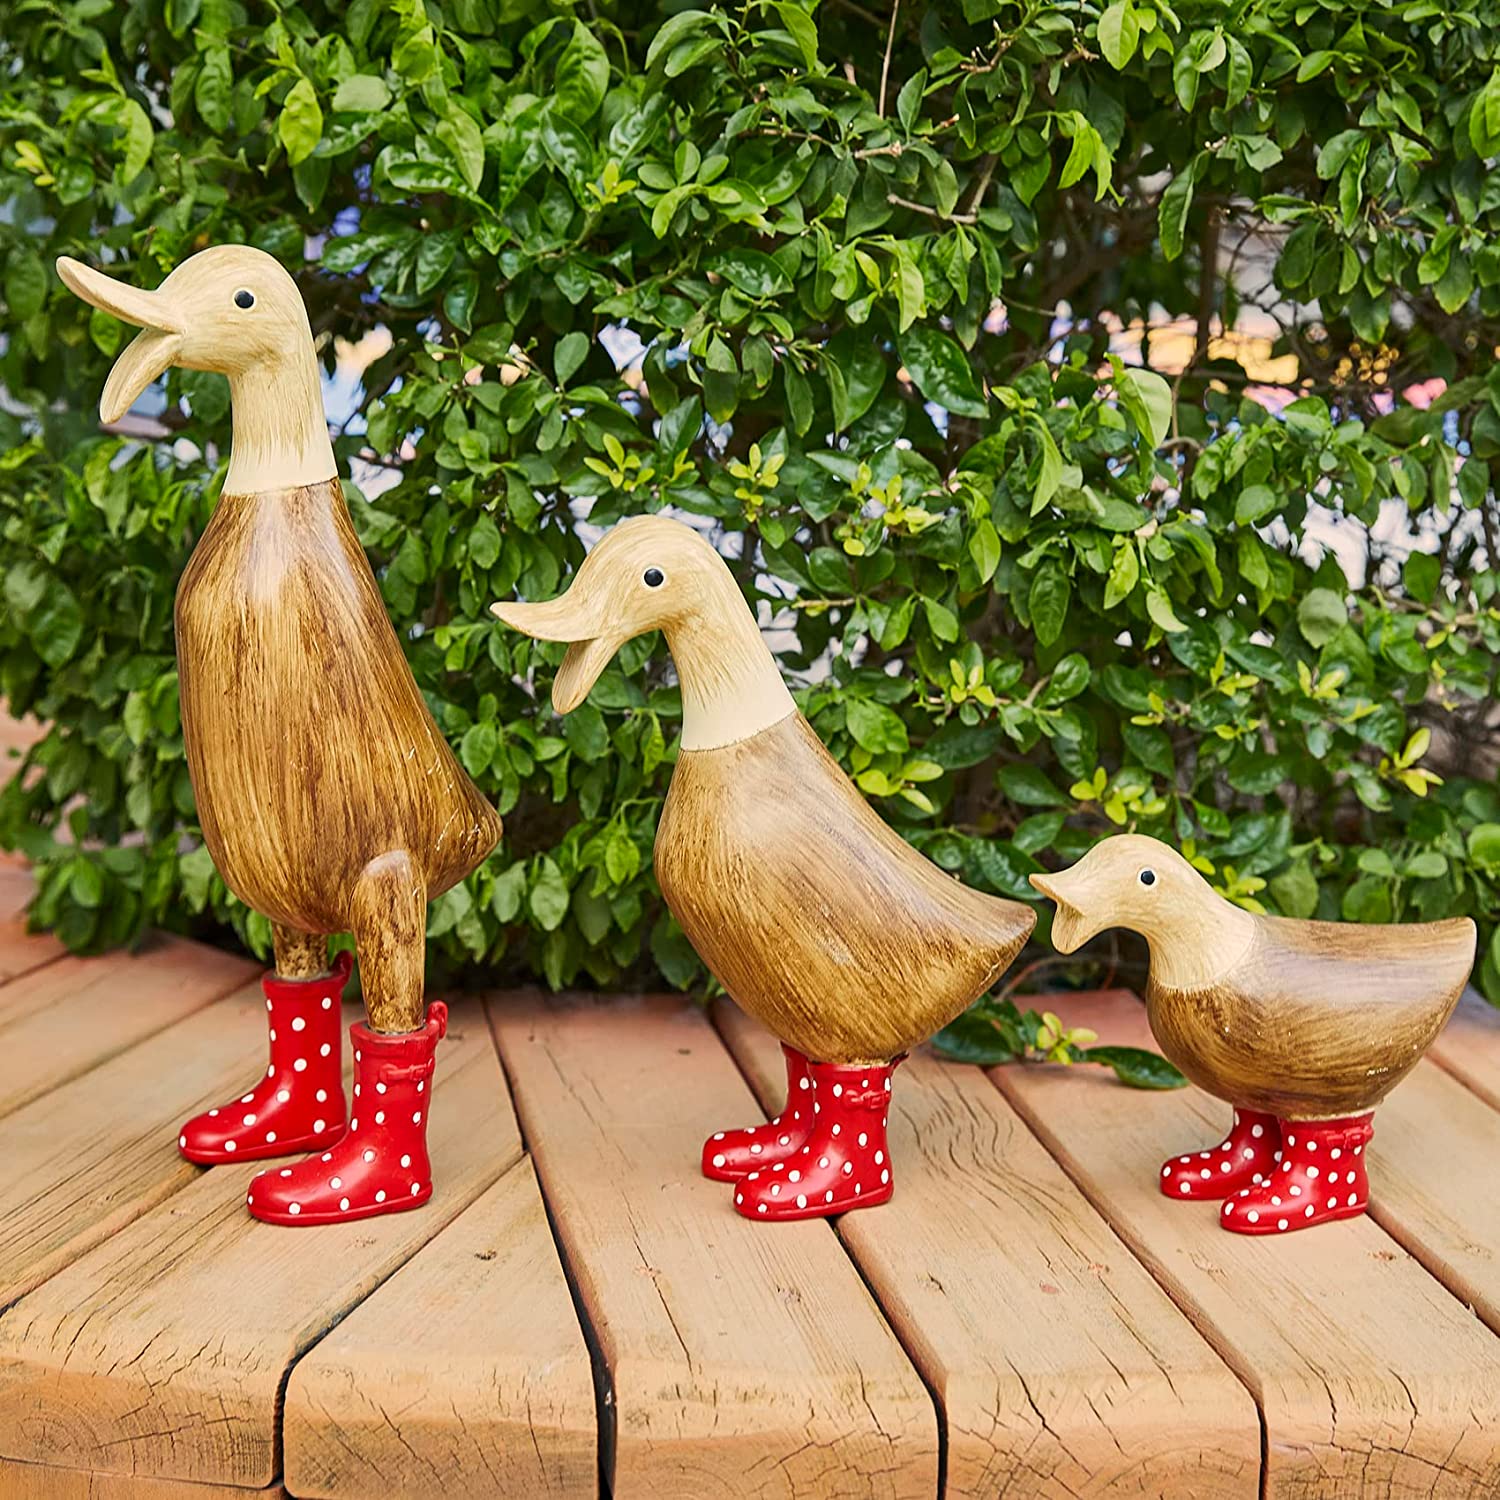 Three wooden garden decor ducks in different poses. All three ducks are wearing red, spotted wellington boots.